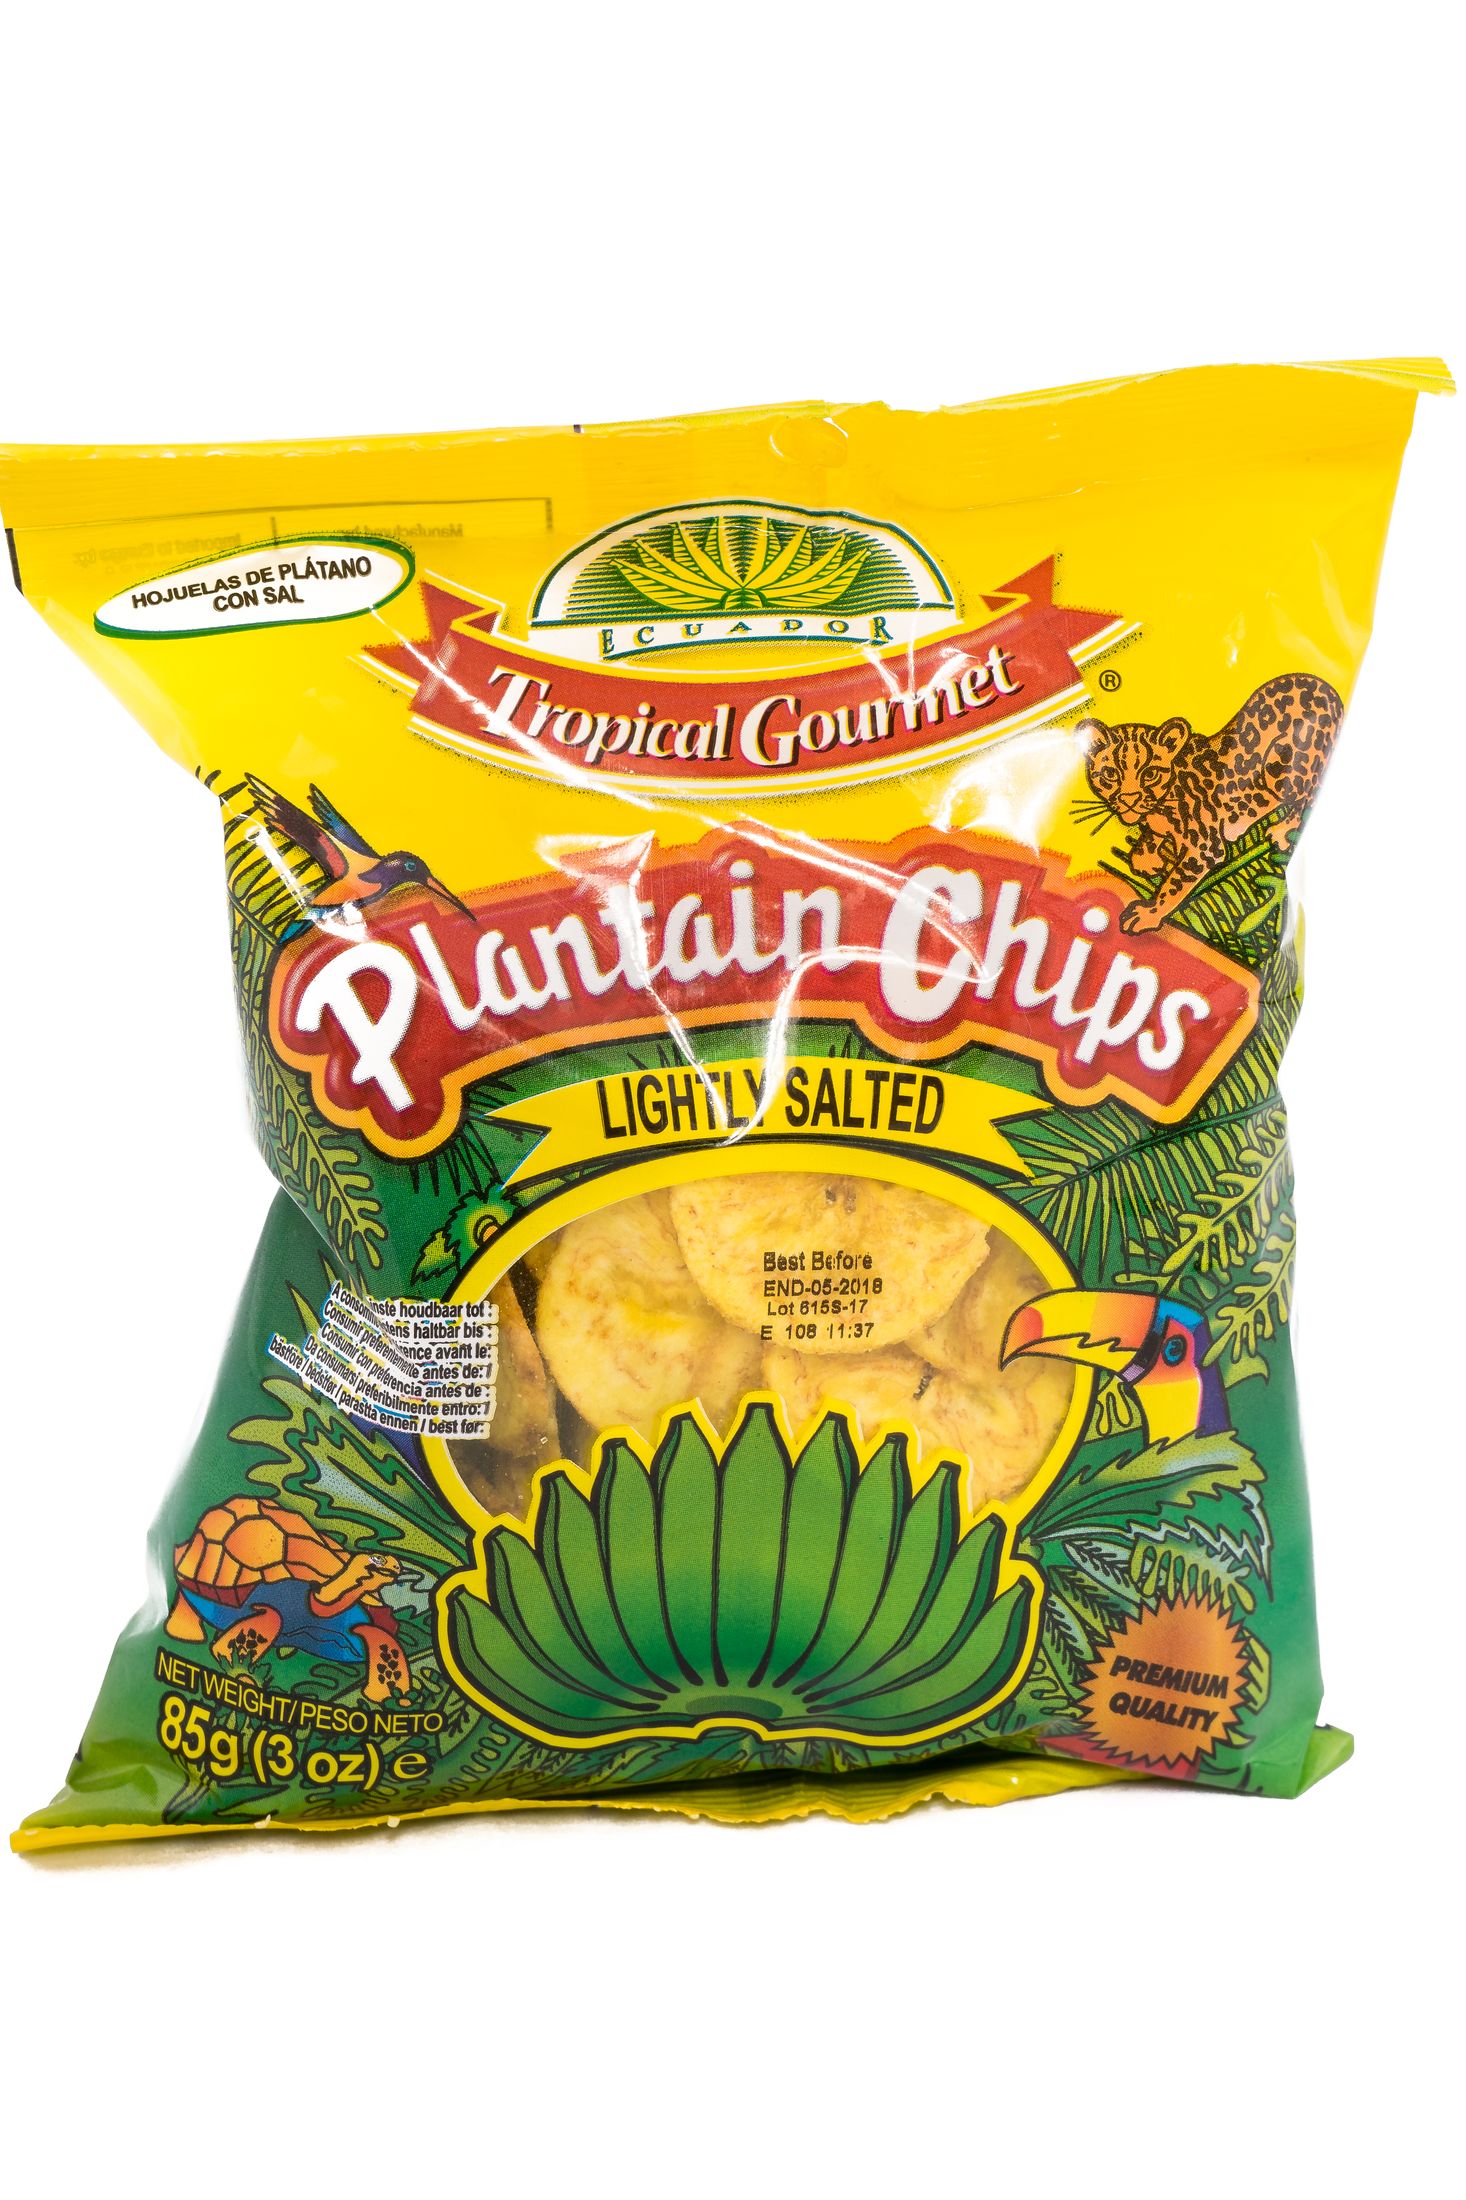 Tropical Gourmet Plantain banana chips lightly salted